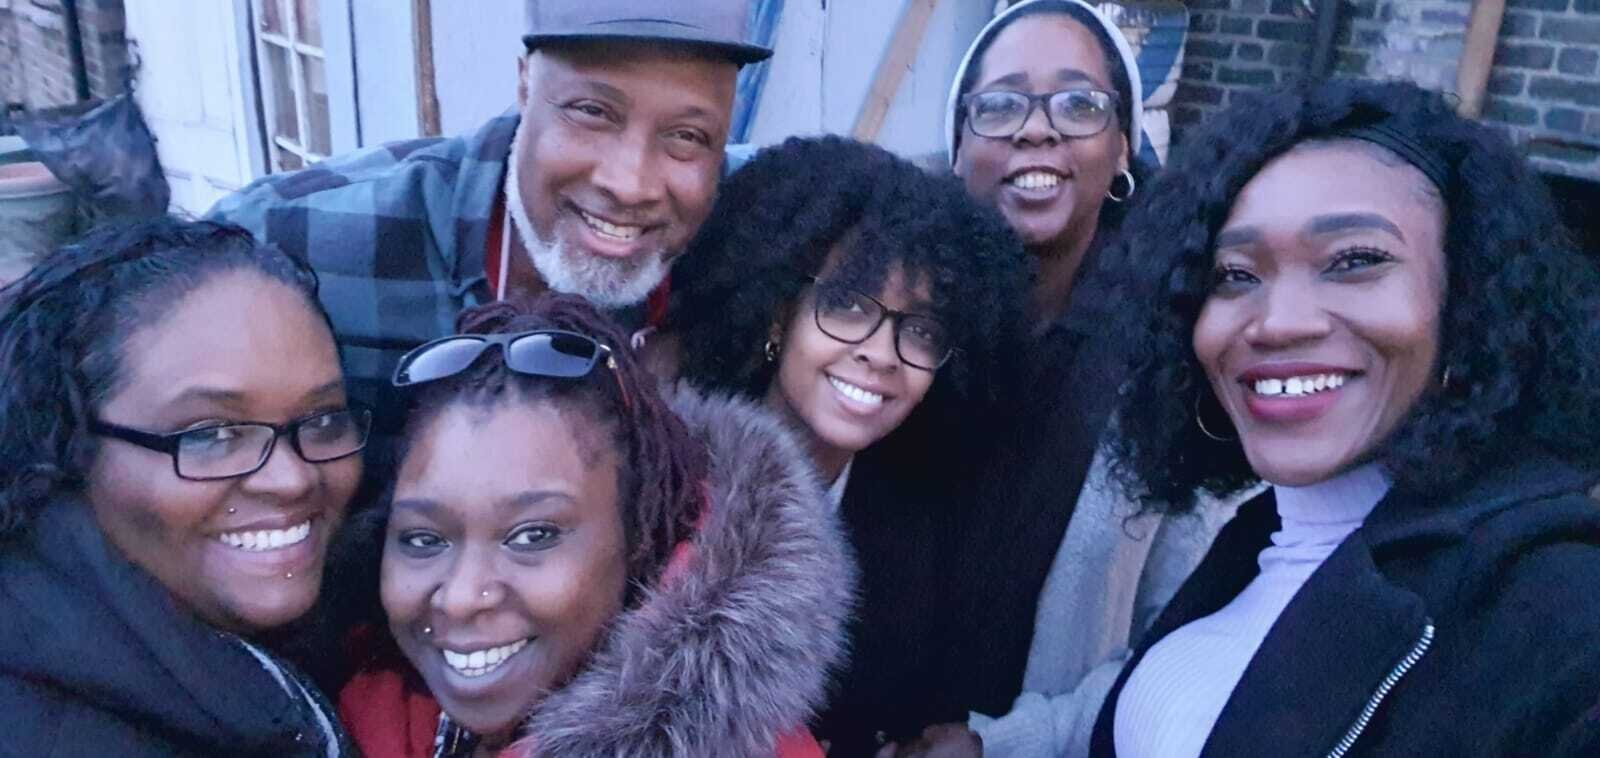 Tishauna Mullings, Black on Track Project Manager with one of the participants Clayton 'Milo' Myles of Flavours Caribbean Cuisine with his family supporting him as he provided food at an event in the Garden at Brixton Dominoes Club